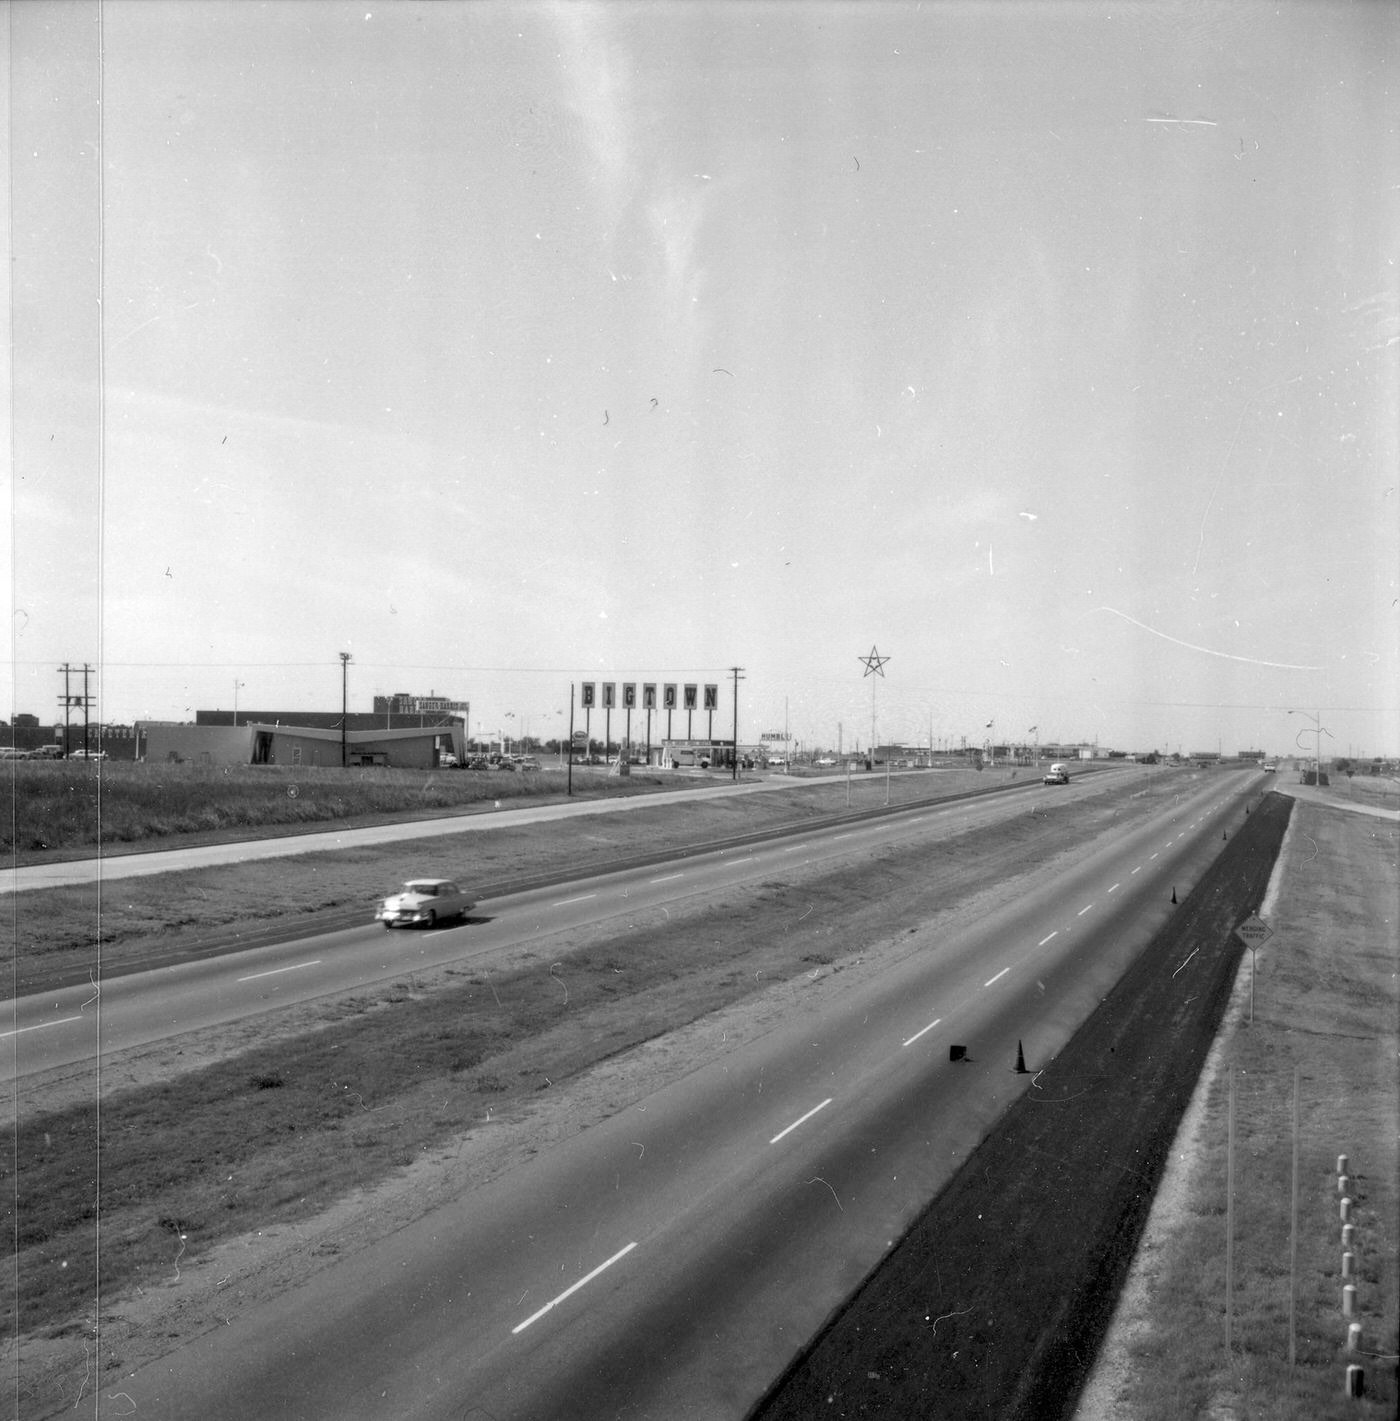 The Dallas area highway with Bigtown sign on left, 1960